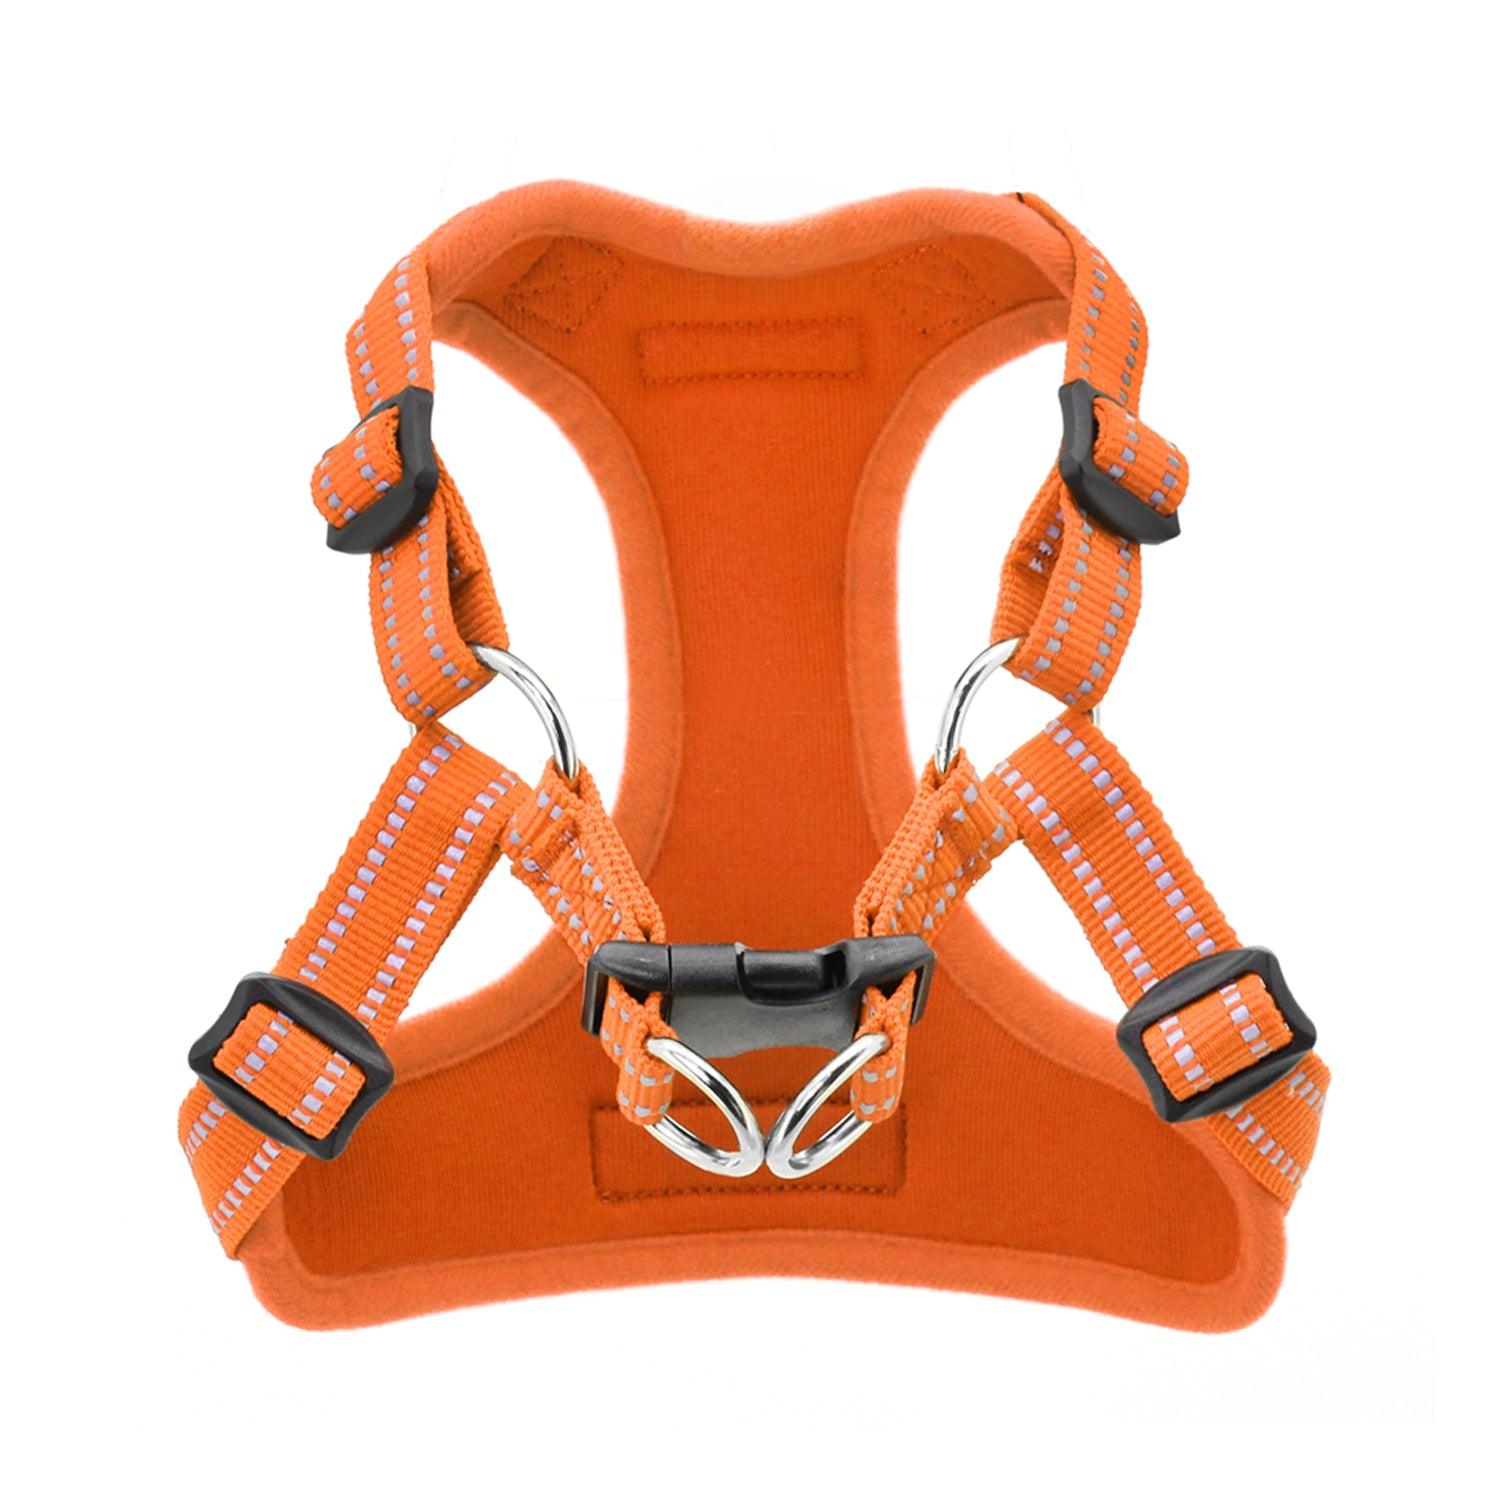 Step-In Flex Dog Harness With Soft Mesh & Adjustable Straps For Dogs -  VOYAGER Dog Harnesses